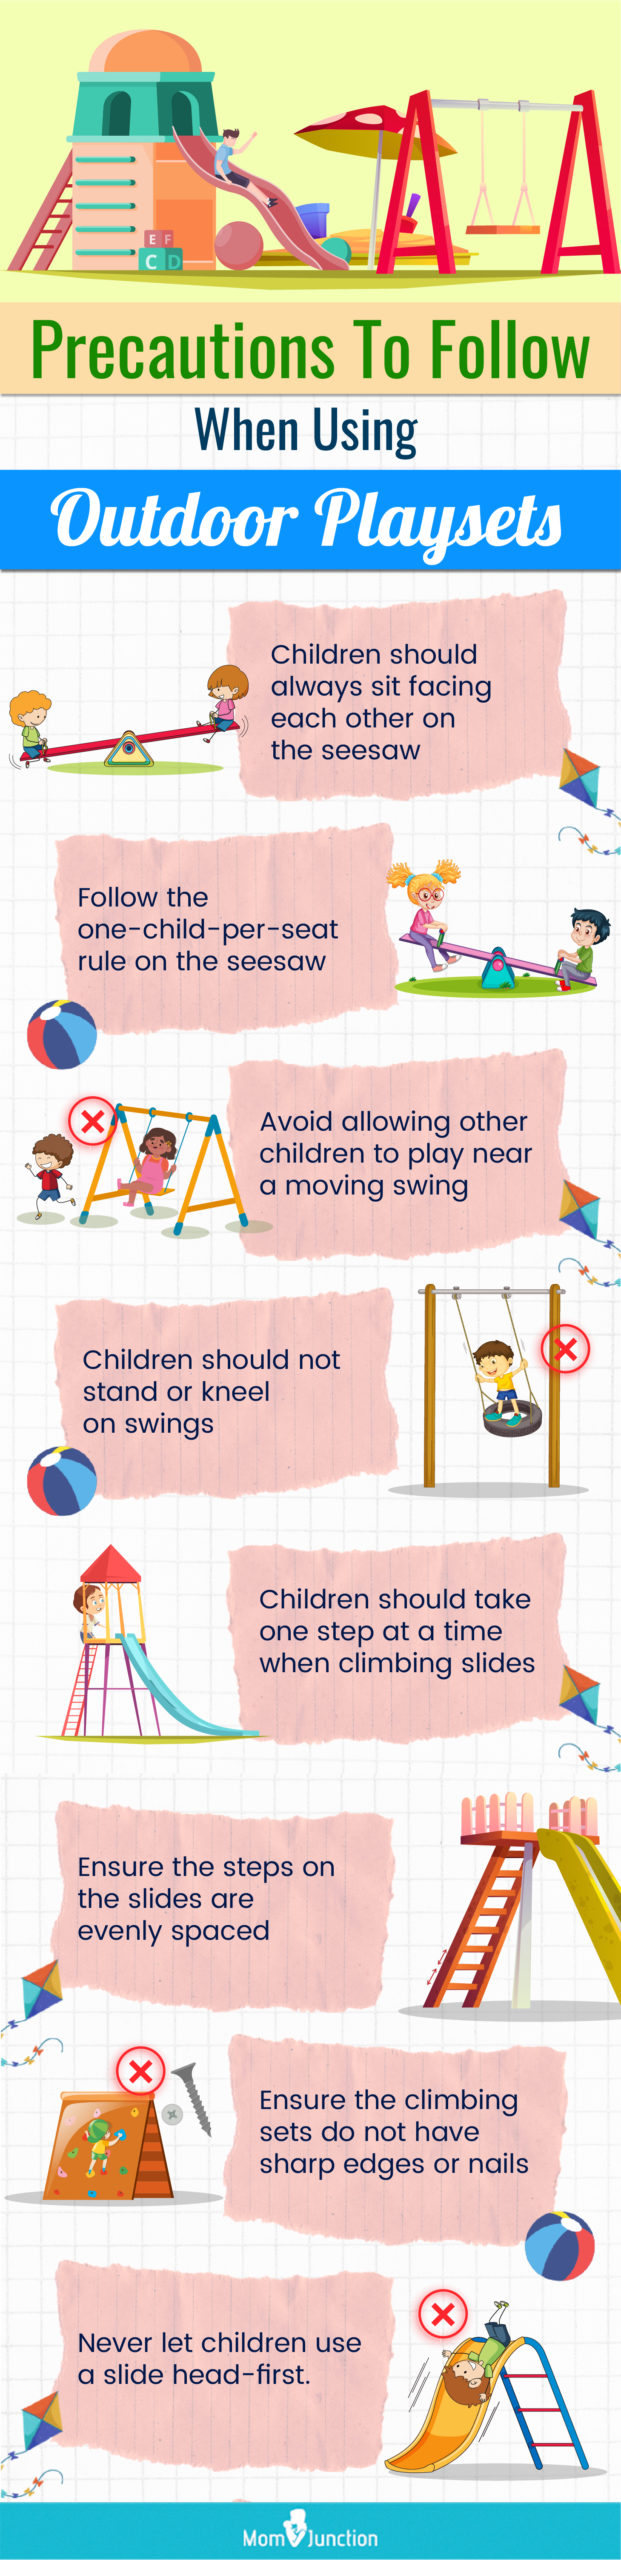 Precautions To Follow When Using Outdoor Playsets (infographic)